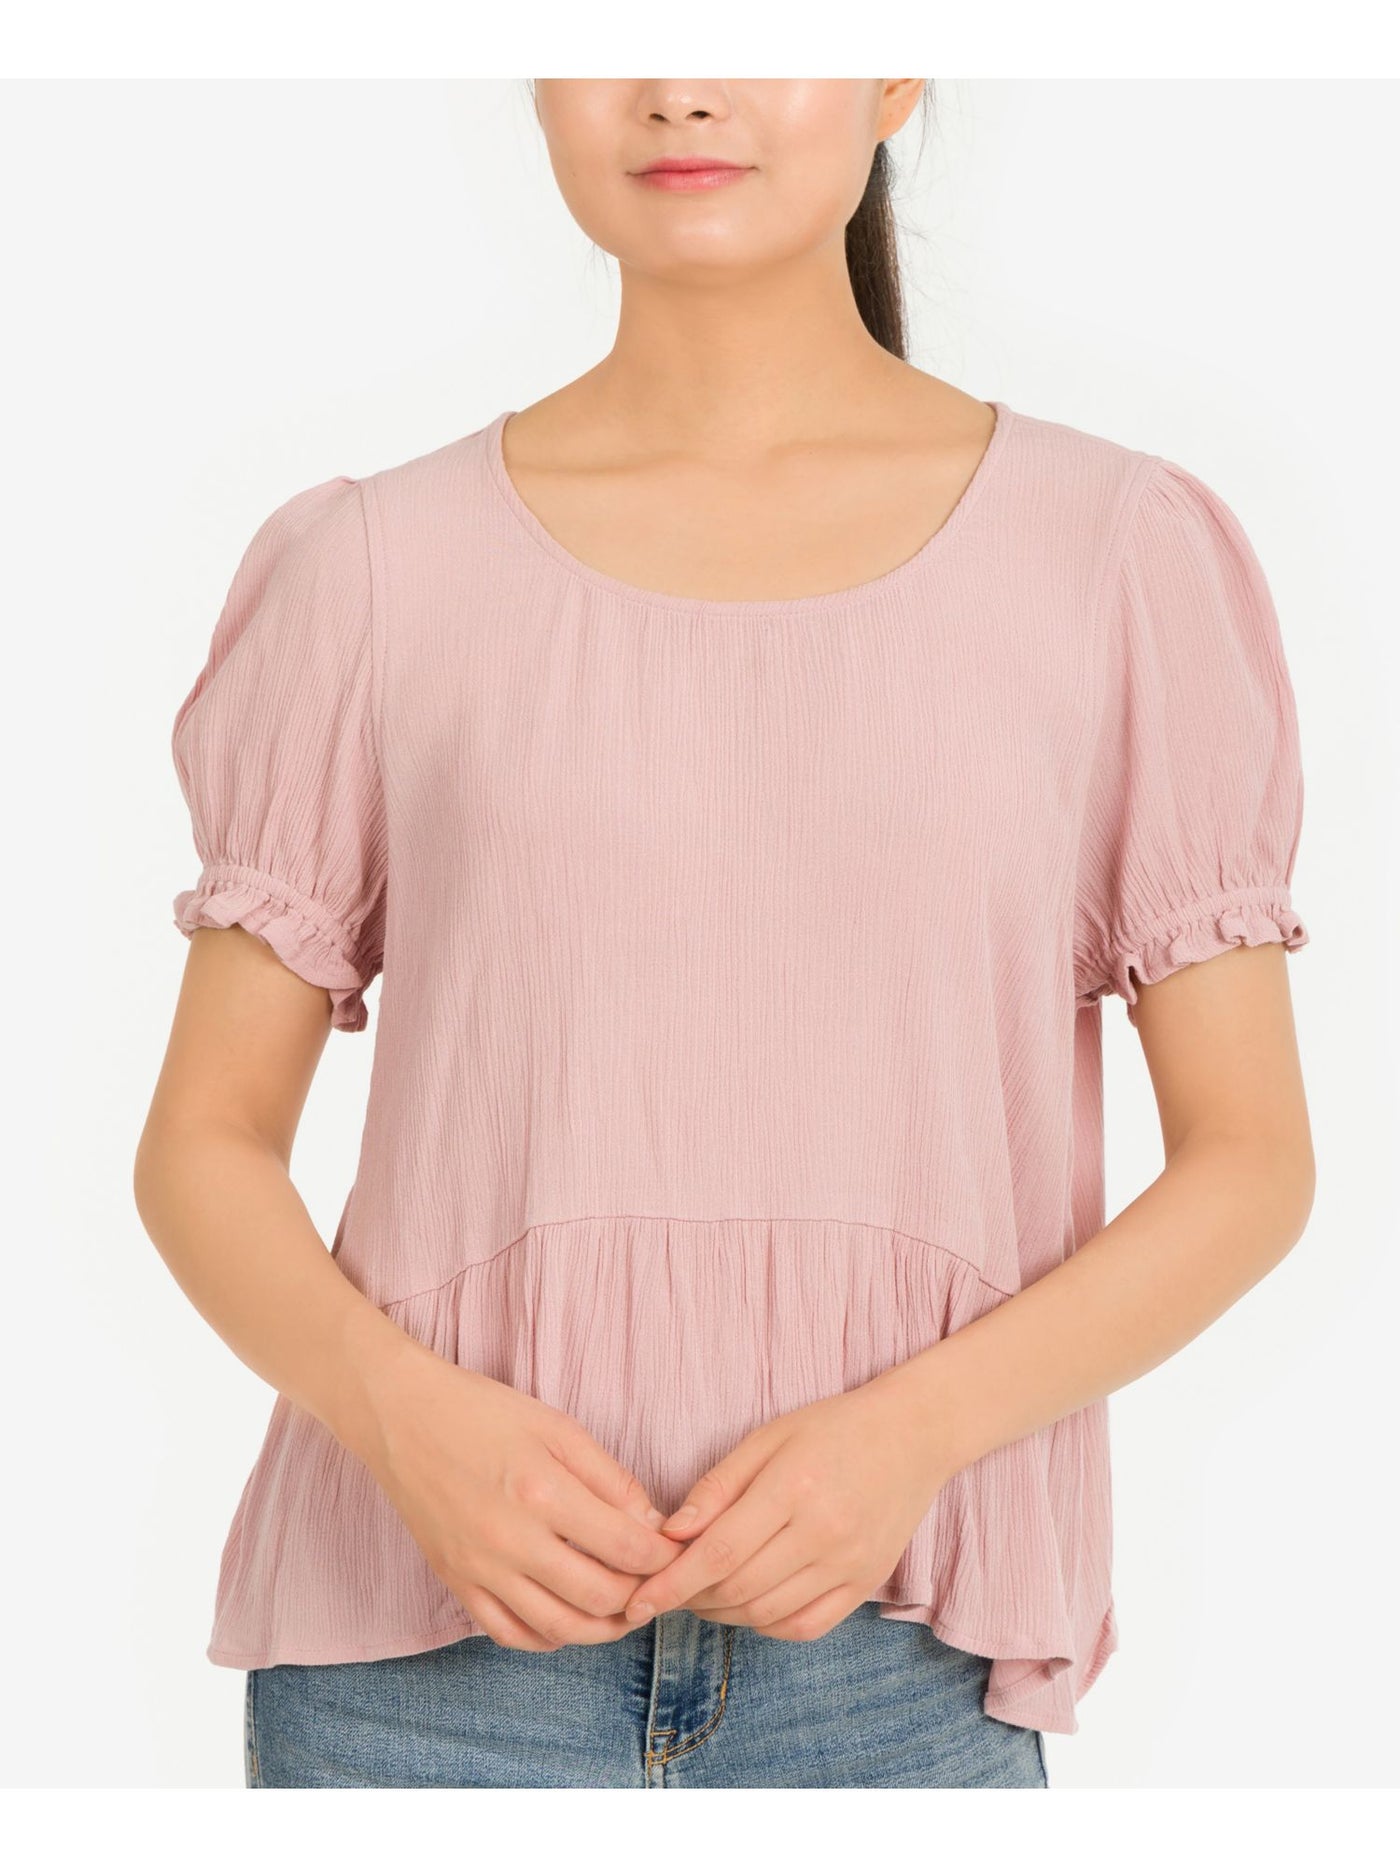 HIPPIE ROSE Womens Pink Ruffled Textured Keyhole-back Pouf Sleeve Scoop Neck Top Juniors M